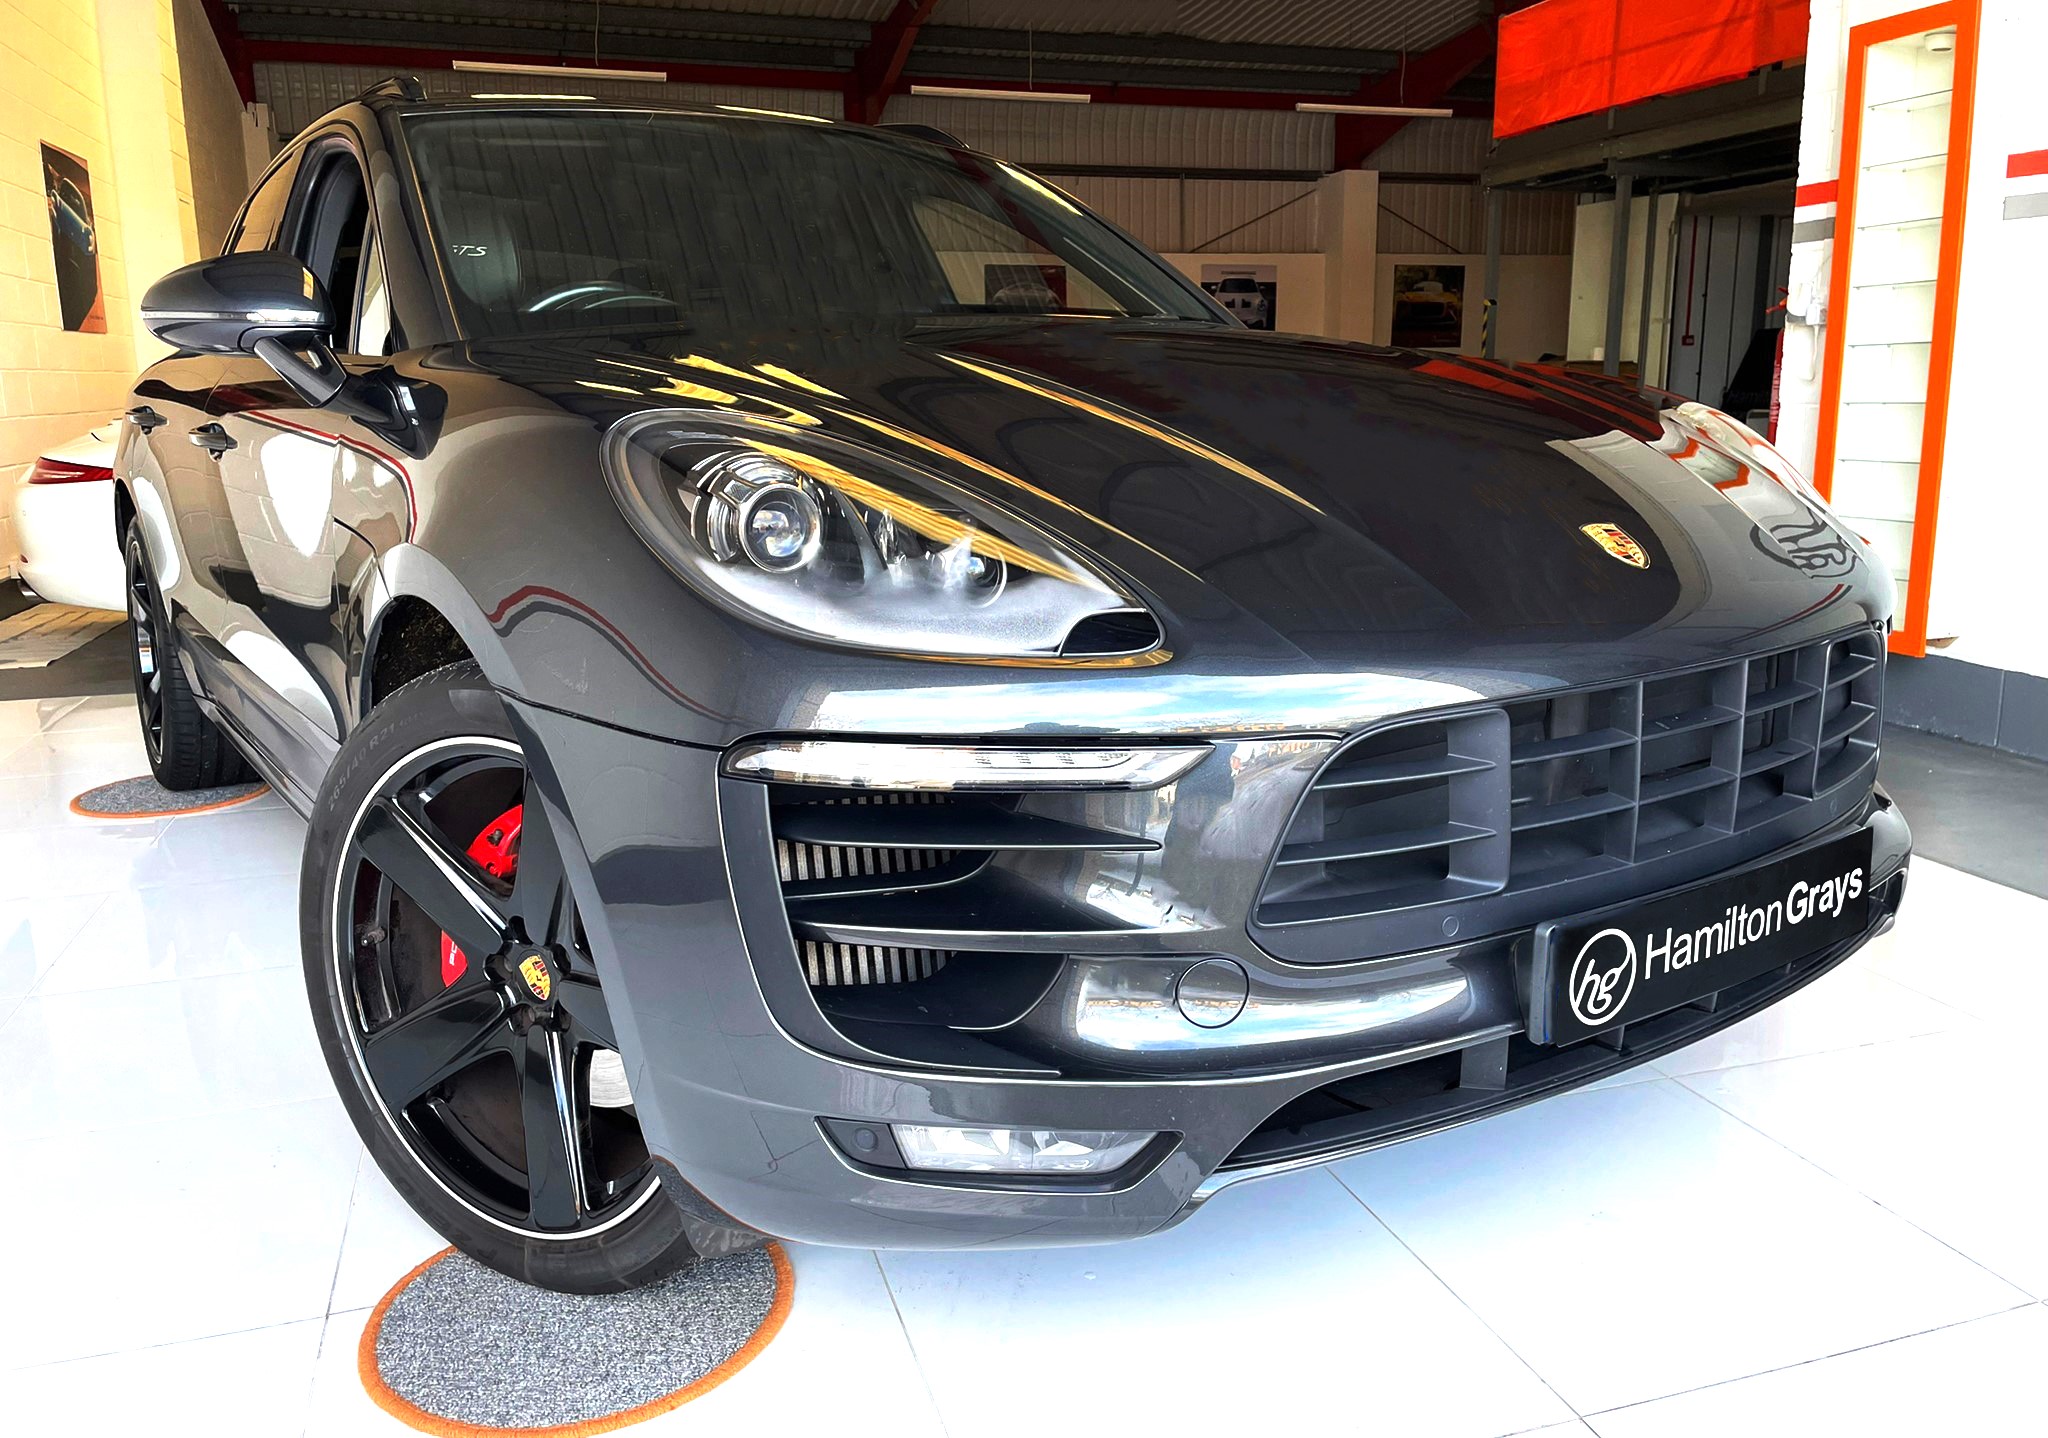 2017 (66) Porsche Macan 3.0T V6 GTS PDK 4WD. In Volcano Grey Metallic with Black and Rhodium Silver Interior. Has FPSH. 45k.. Top Spec’  (SOLD)